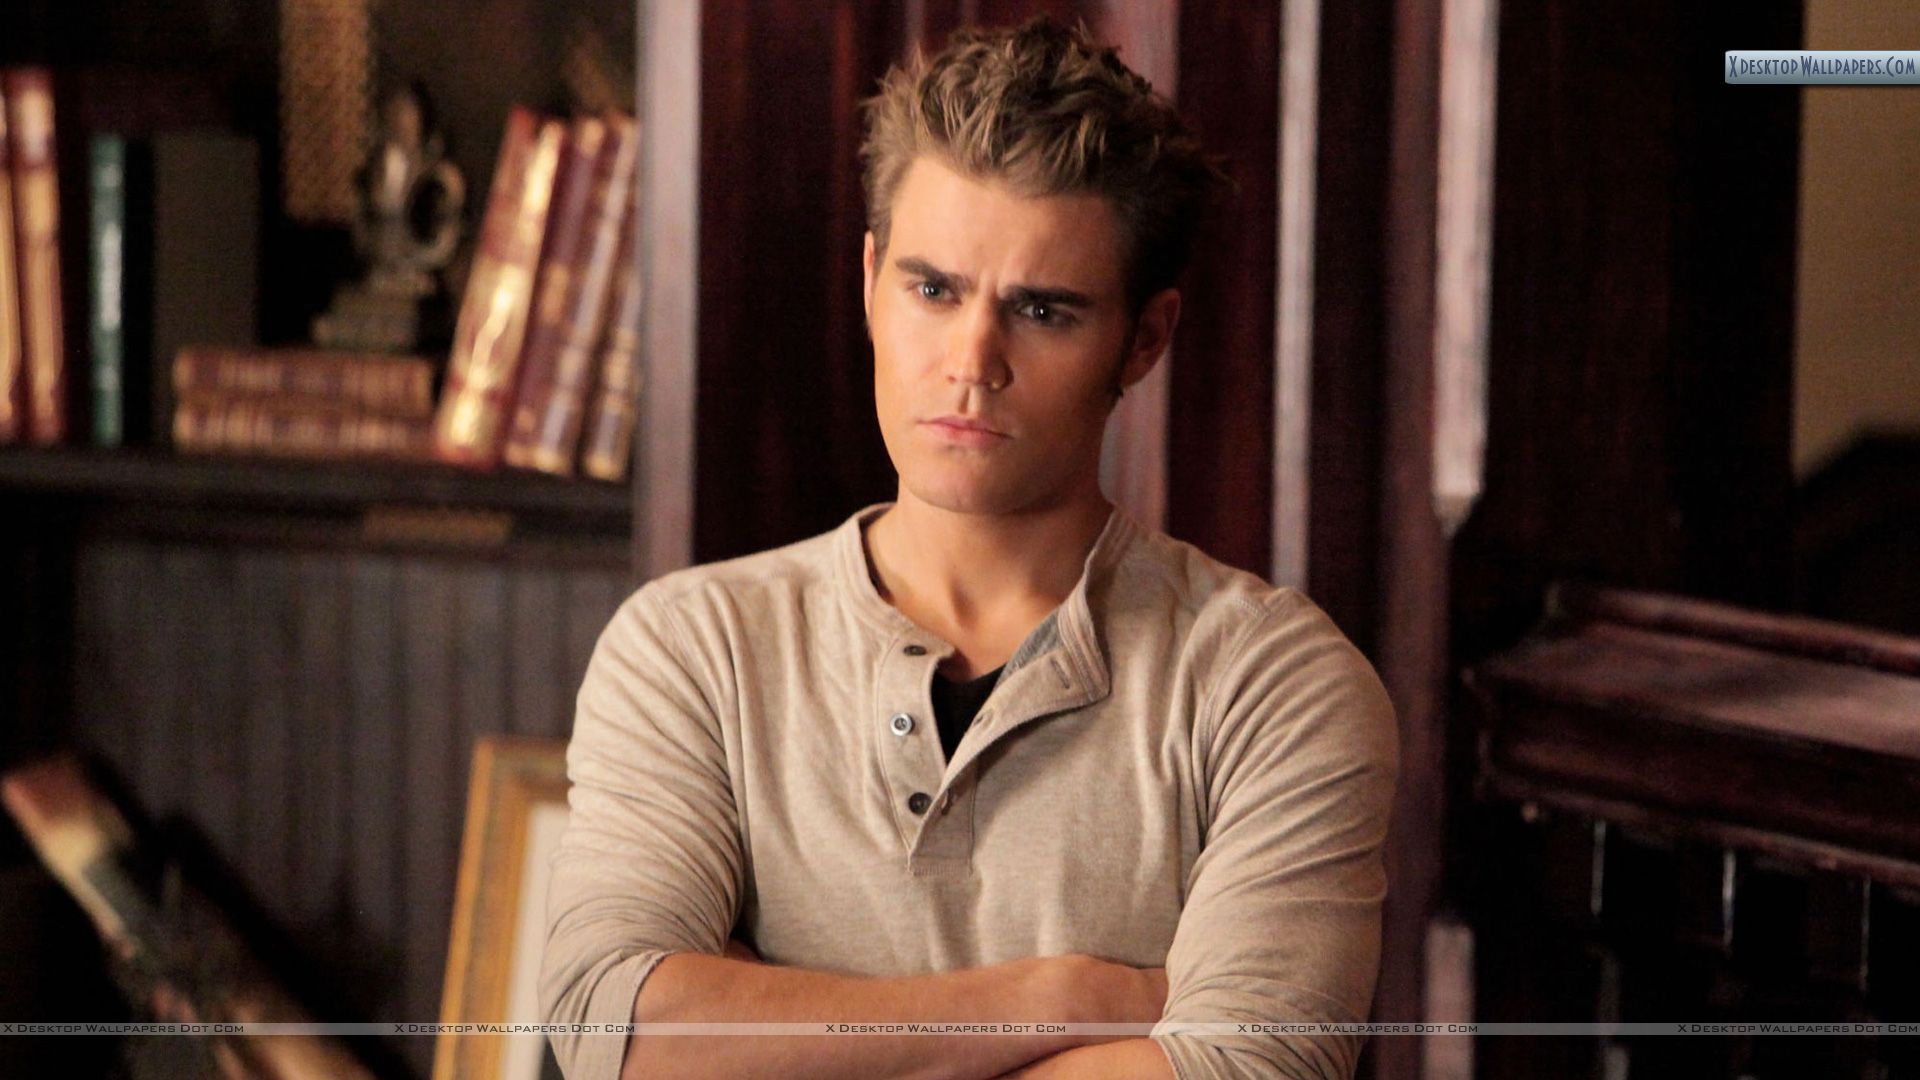 Actor Paul Wesley Wallpaper And Image Pictures Photos